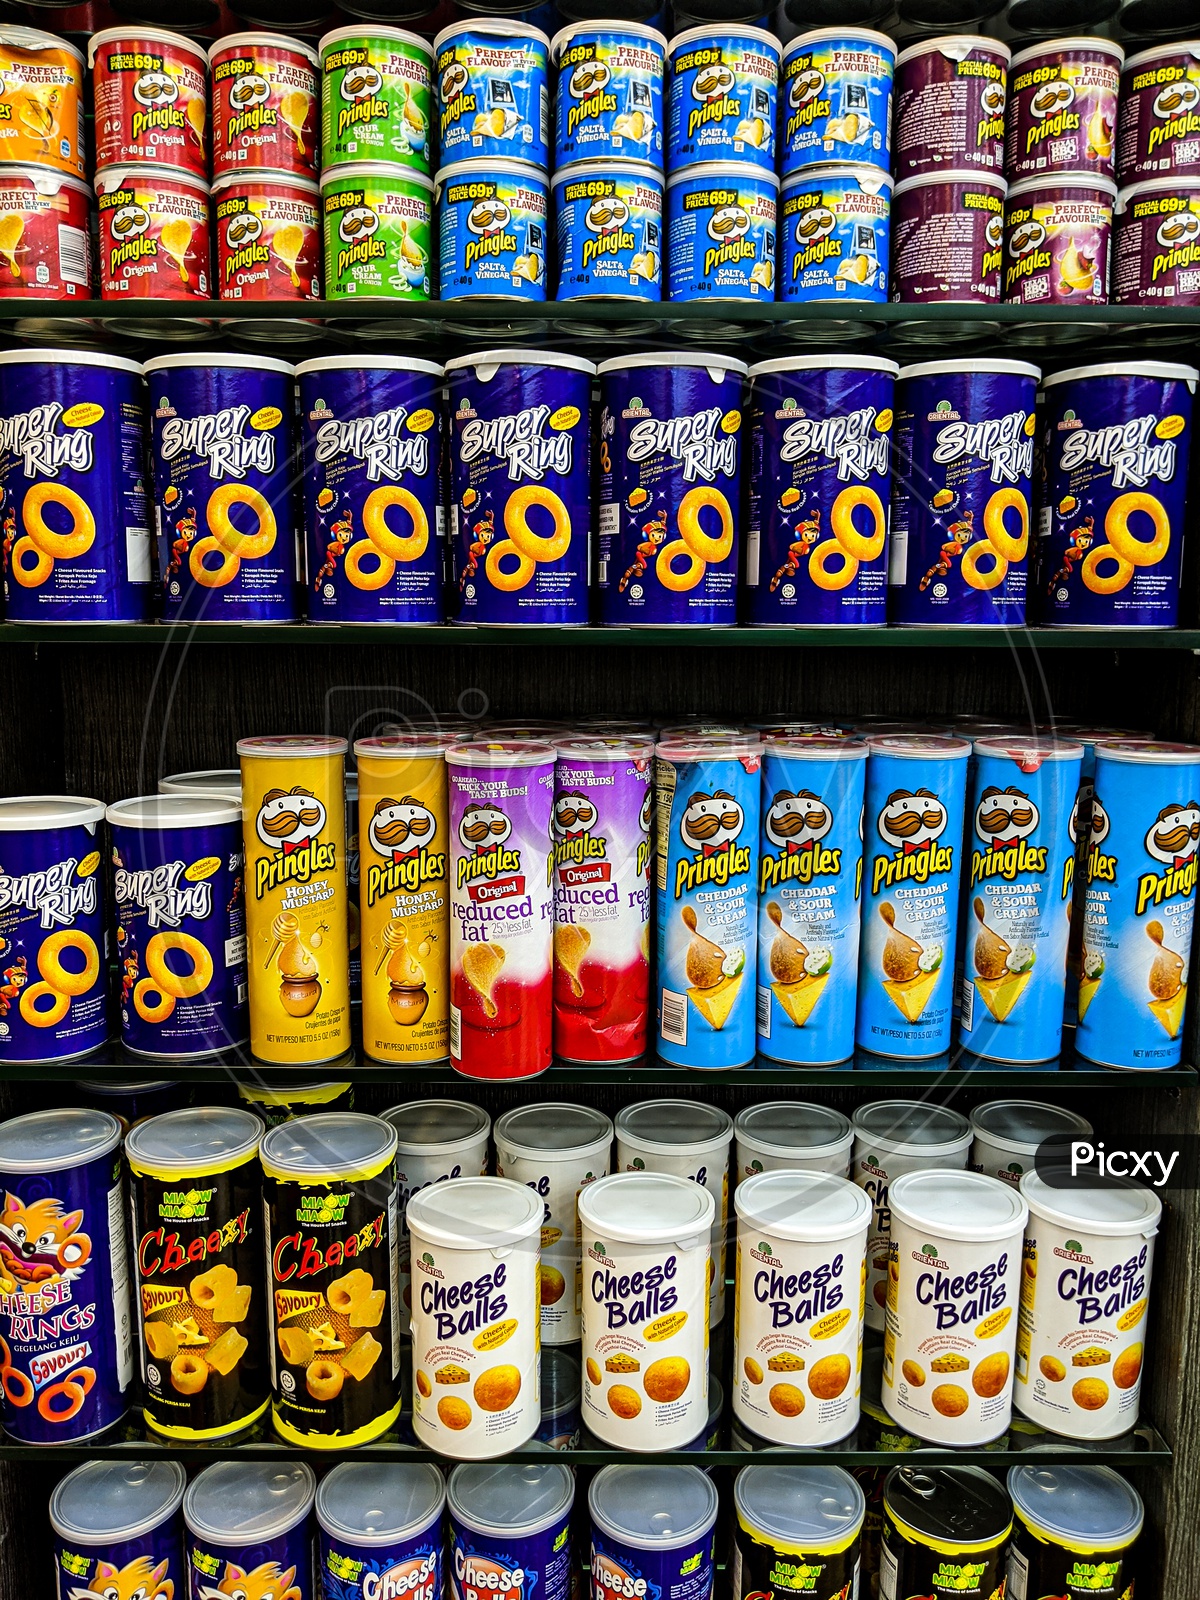 Baked Food in Cans At an Super Market